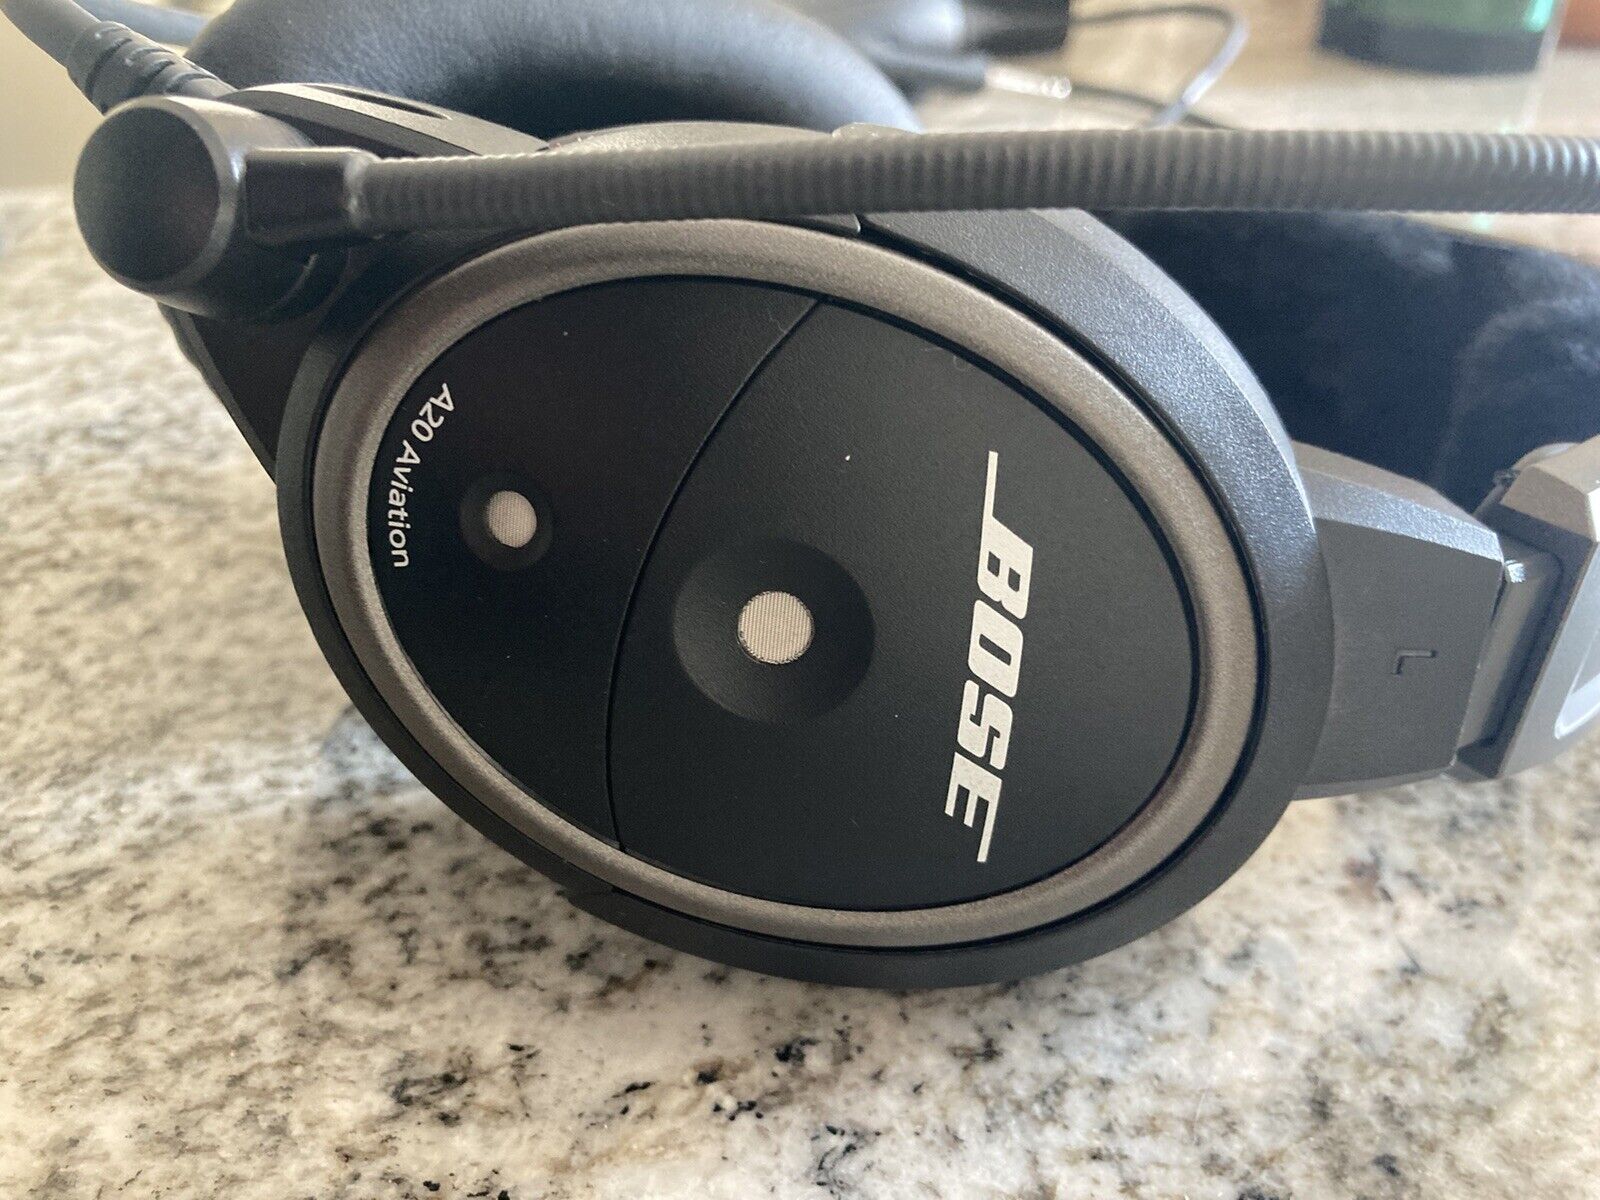 Bose A20 Aviation Headset without Bluetooth Dual Plug Cable - Black